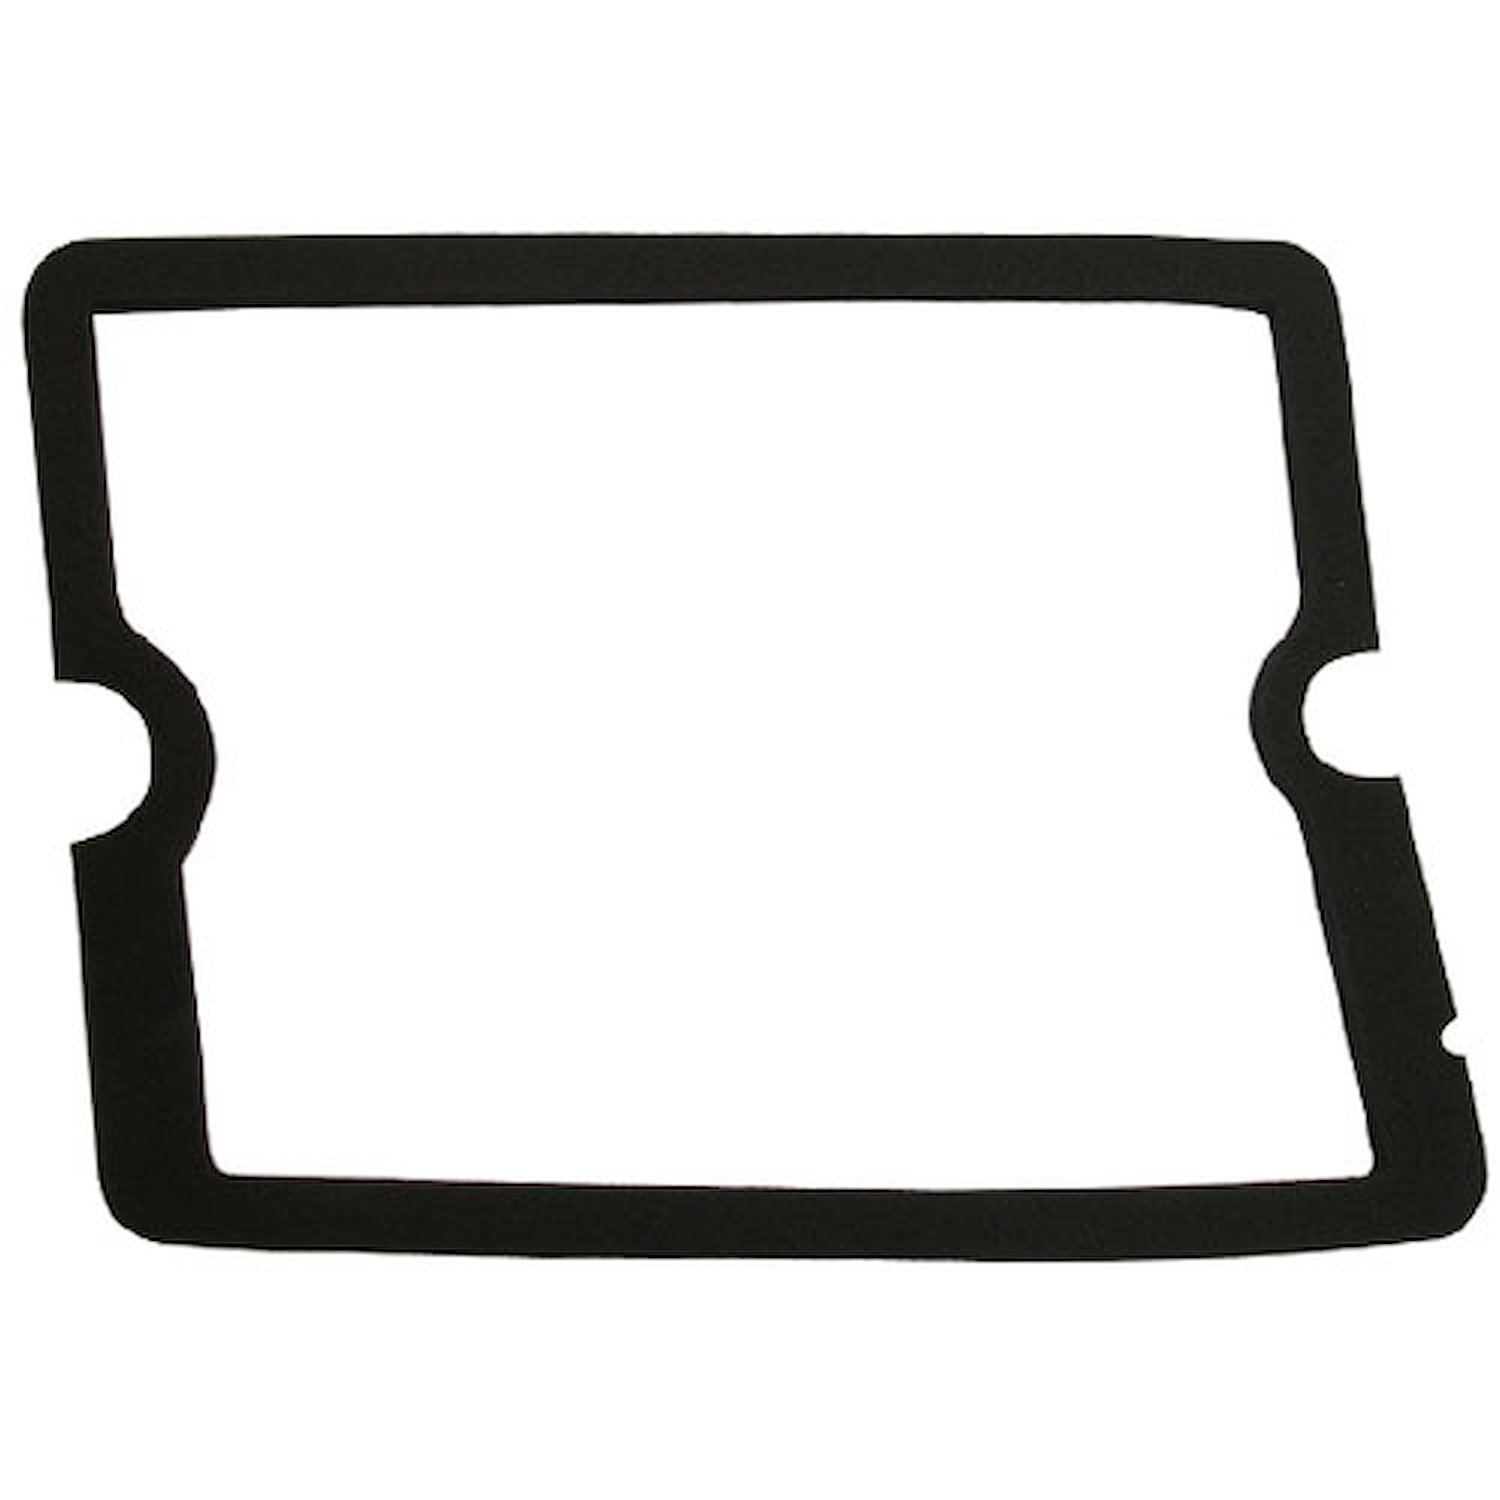 Rear Side Marker Assembly Gasket 1973-77 Chevy El Camino